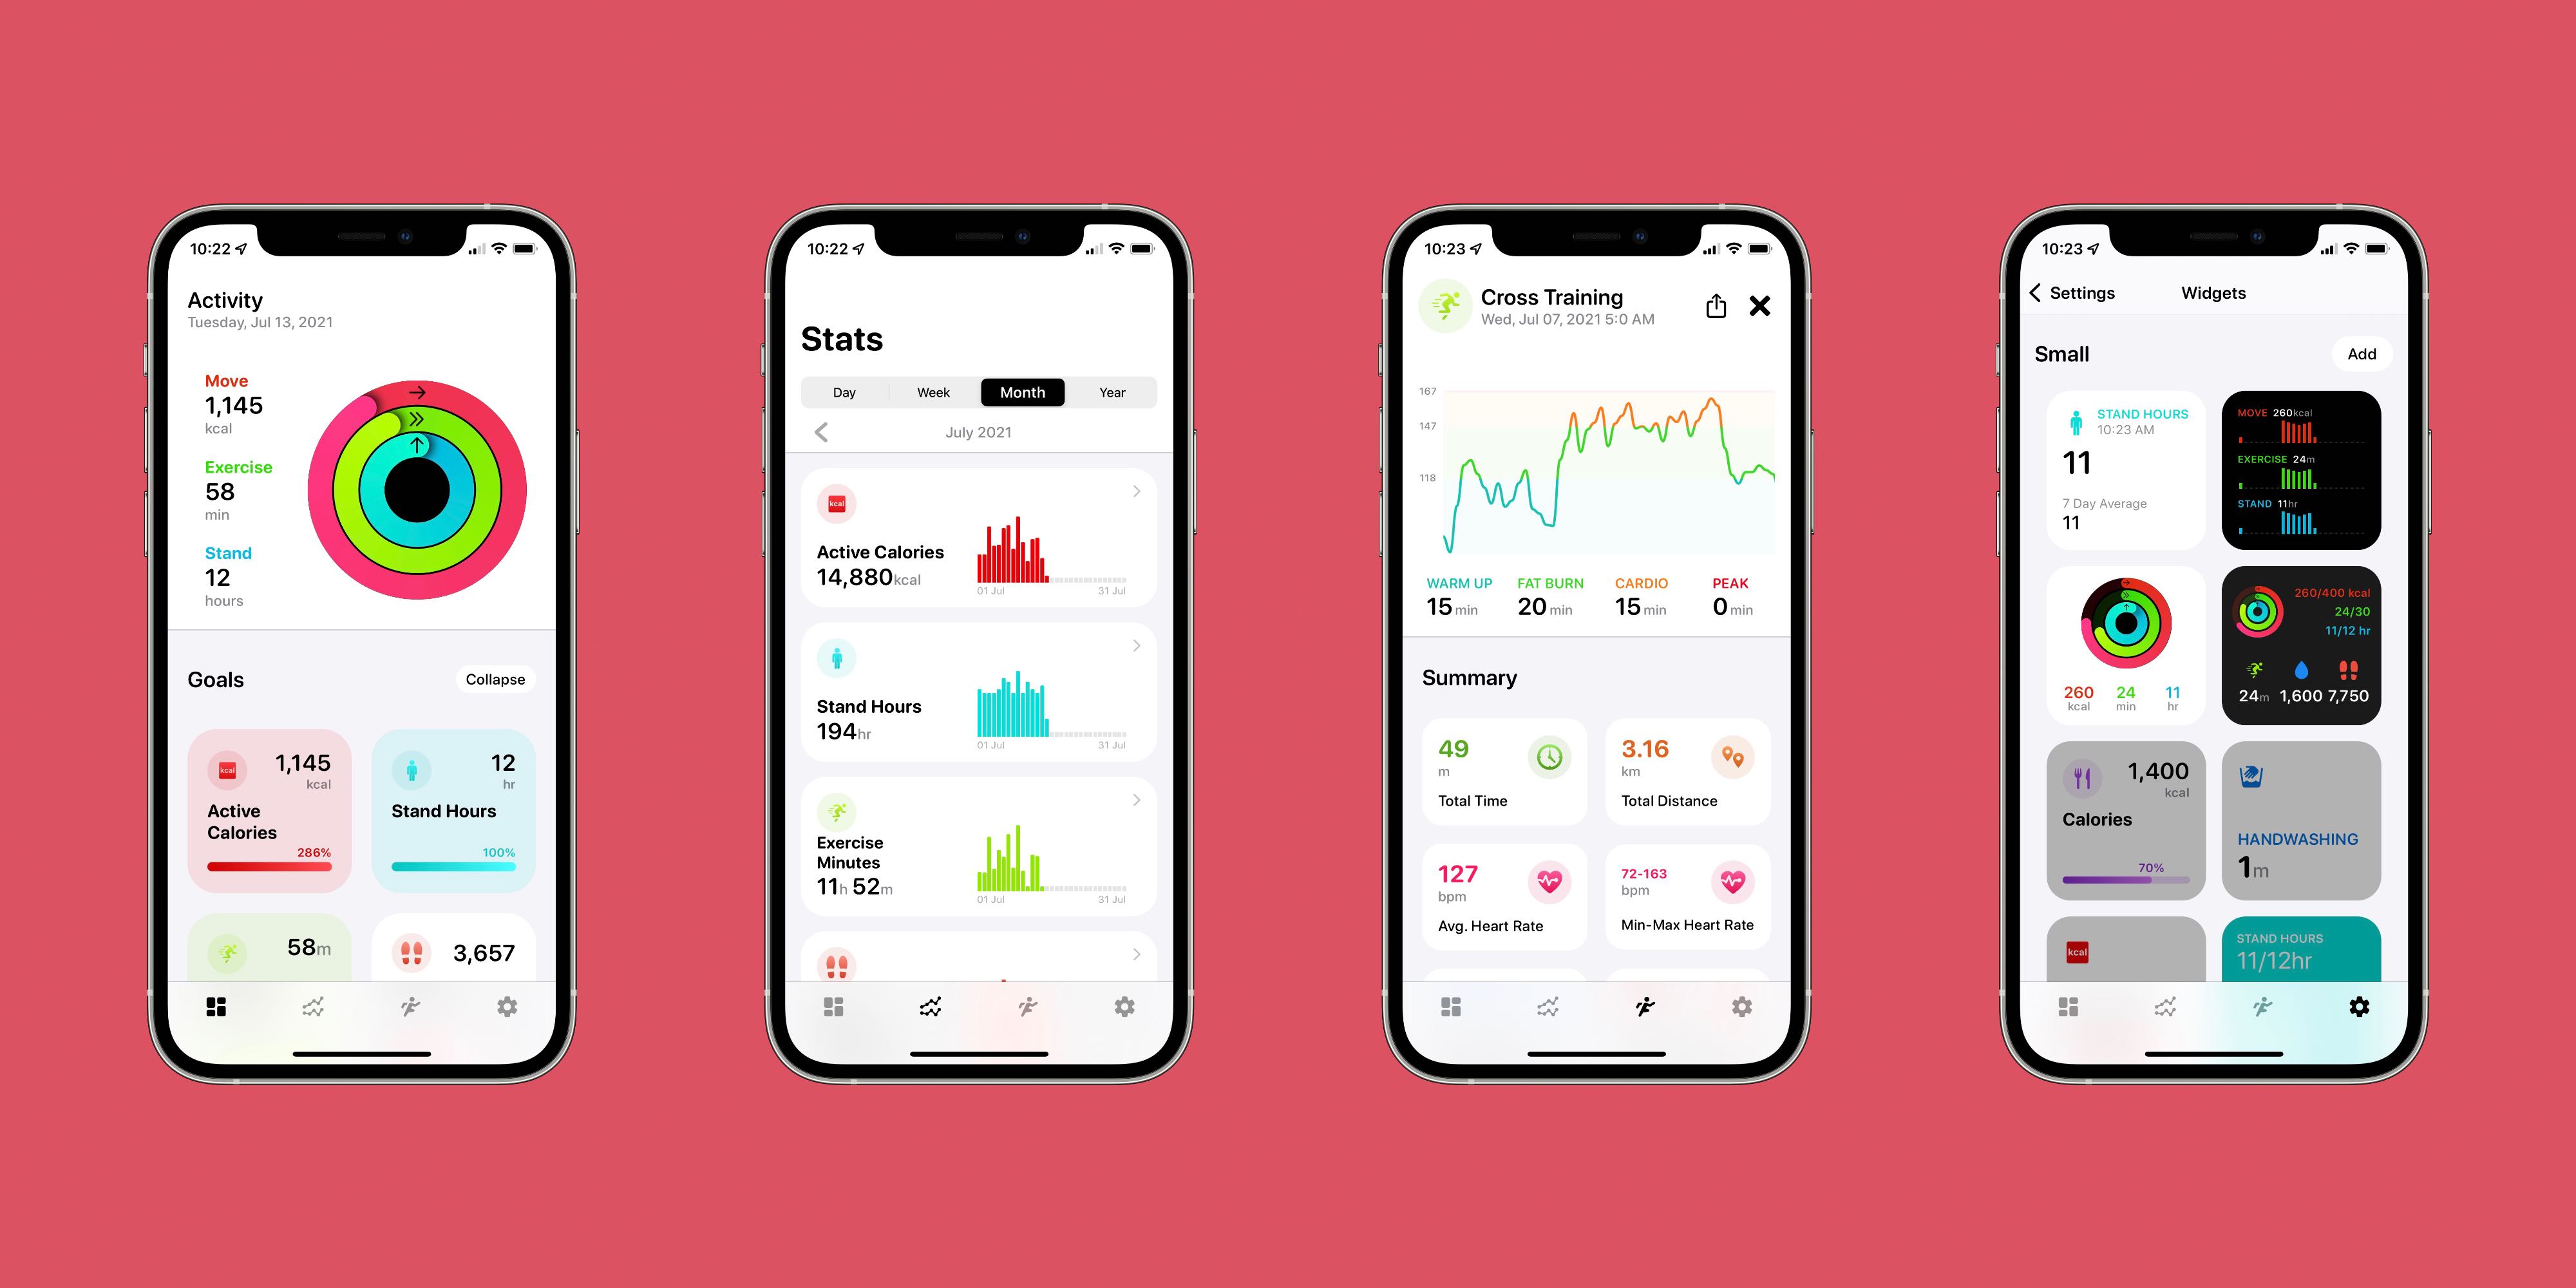 Fitnessview For Iphone And Apple Watch Gives You A New Way To Visualize  Your Health Data - 9To5Mac